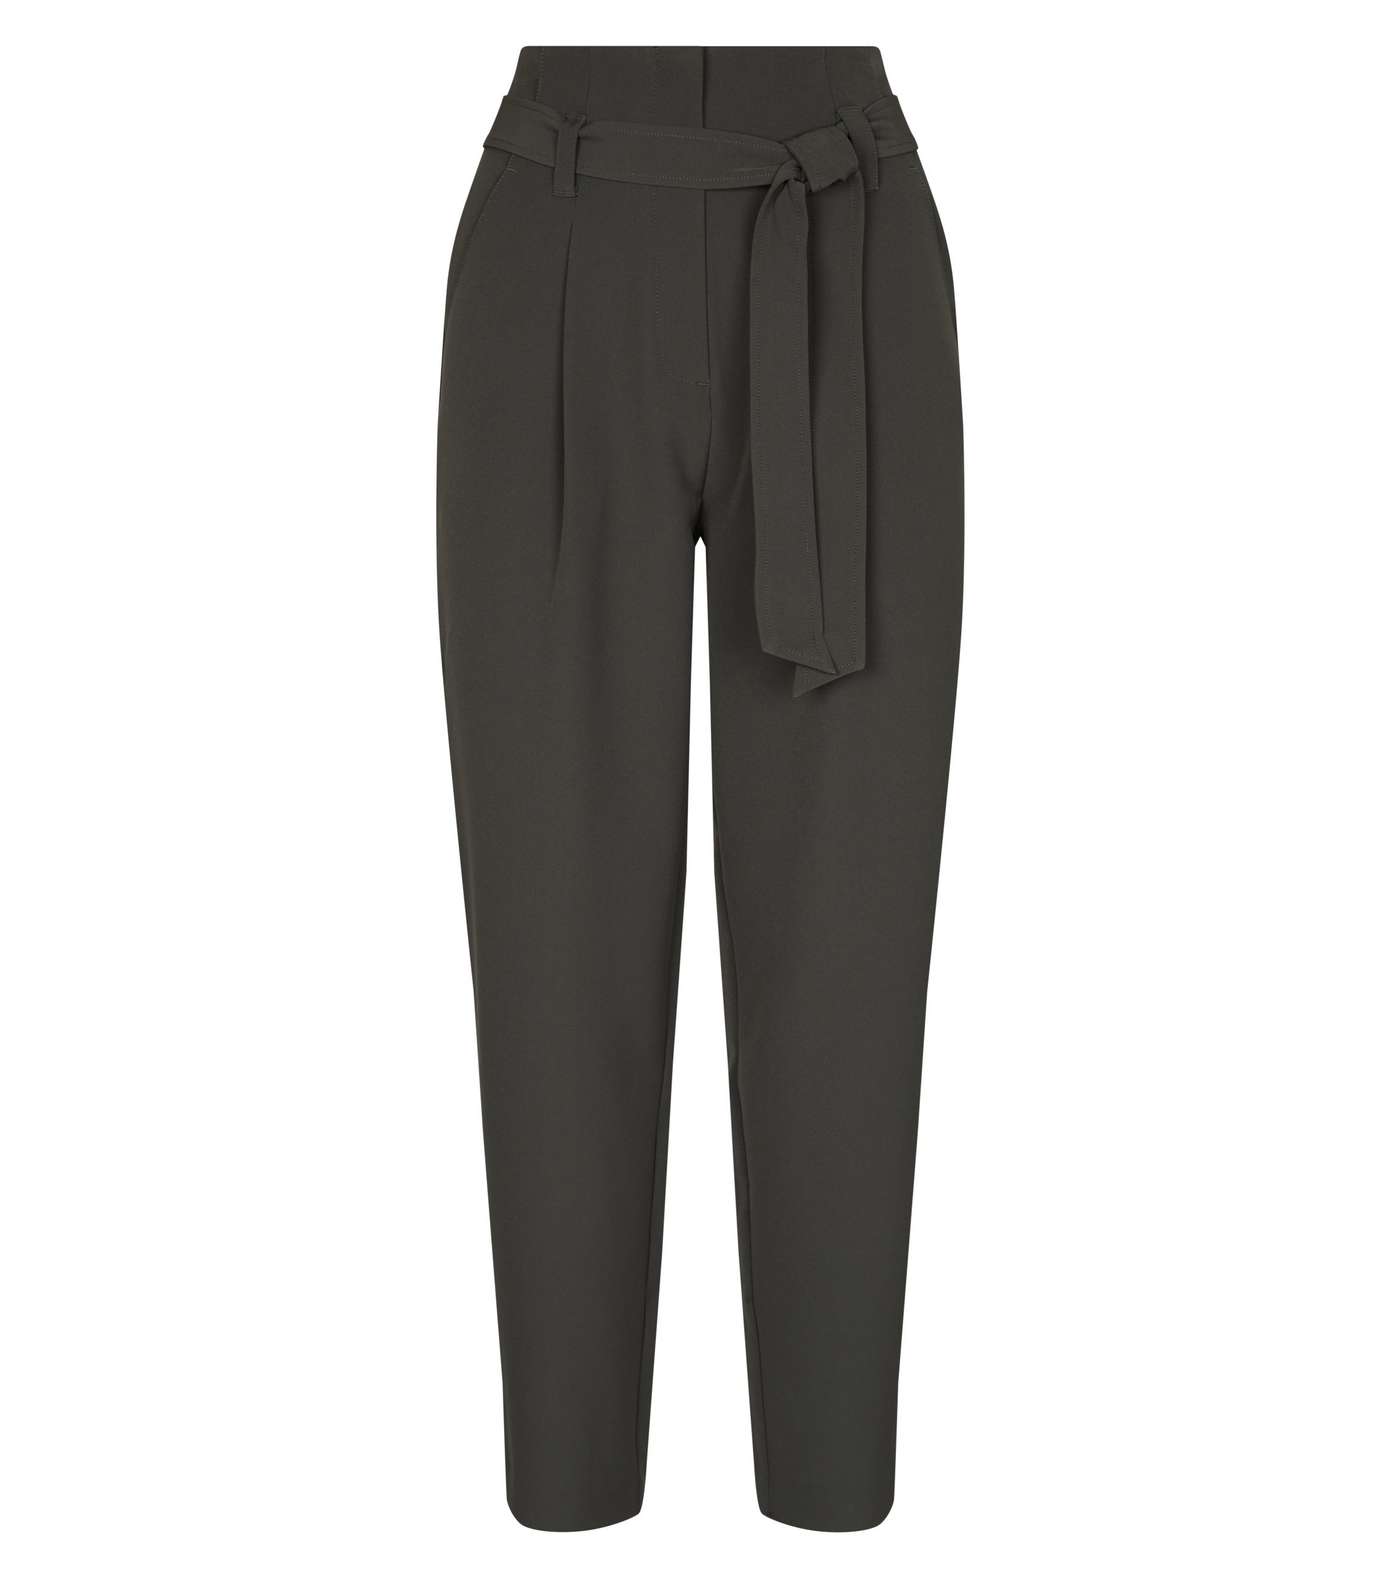 Green High Waist Tapered Trousers Image 4